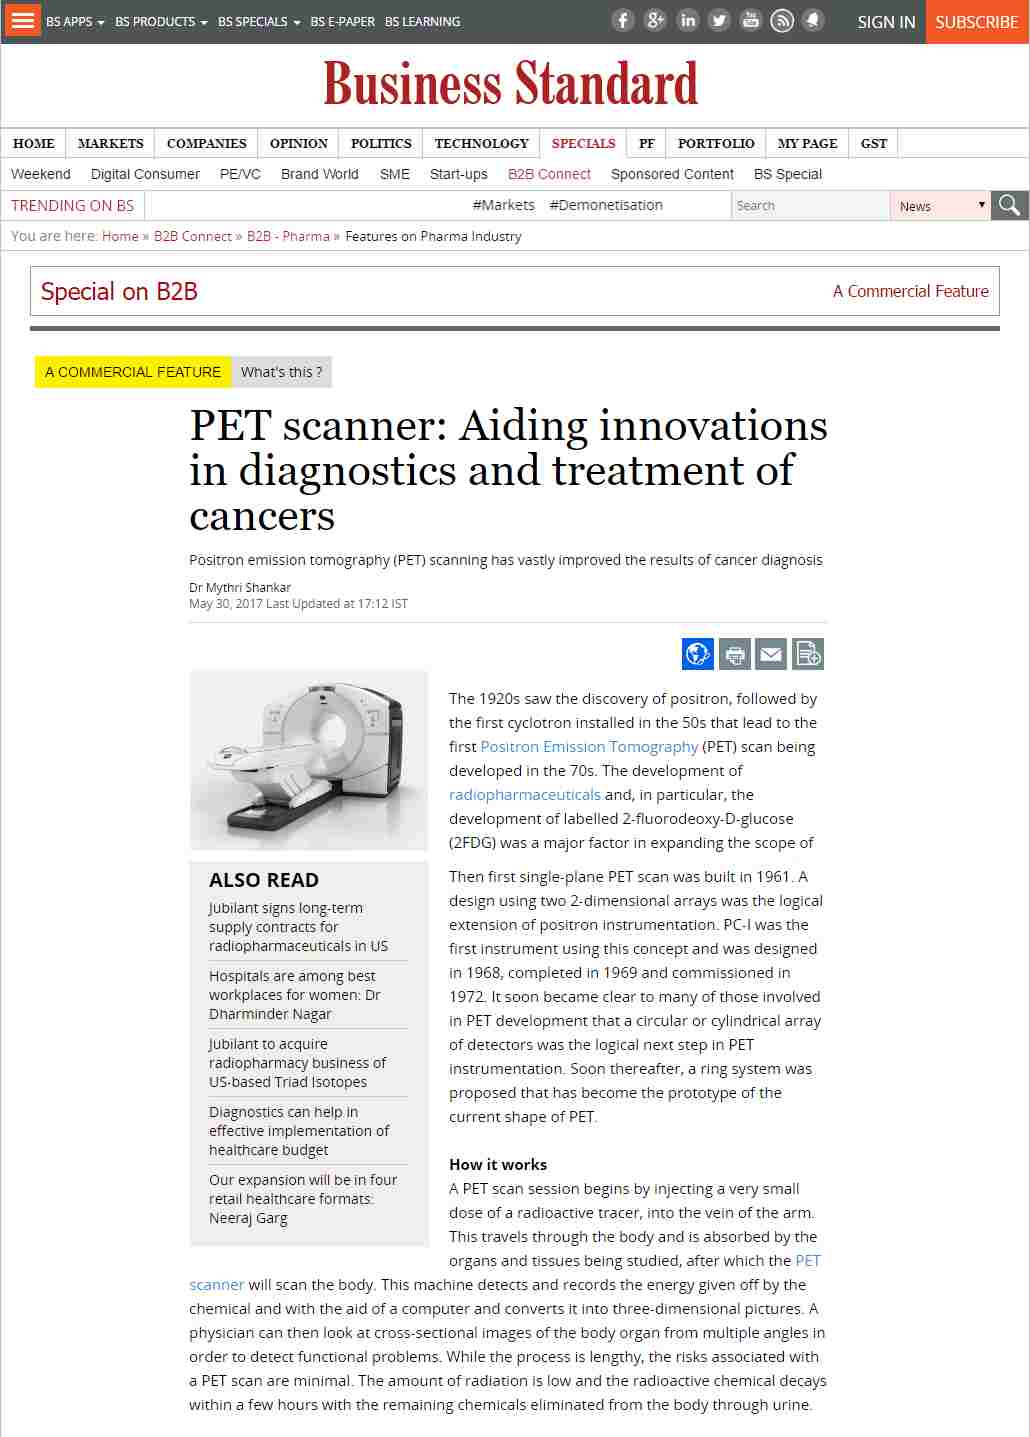 Pet Scanner: Aiding Innovations in Diagnostics and Cancer Treatments